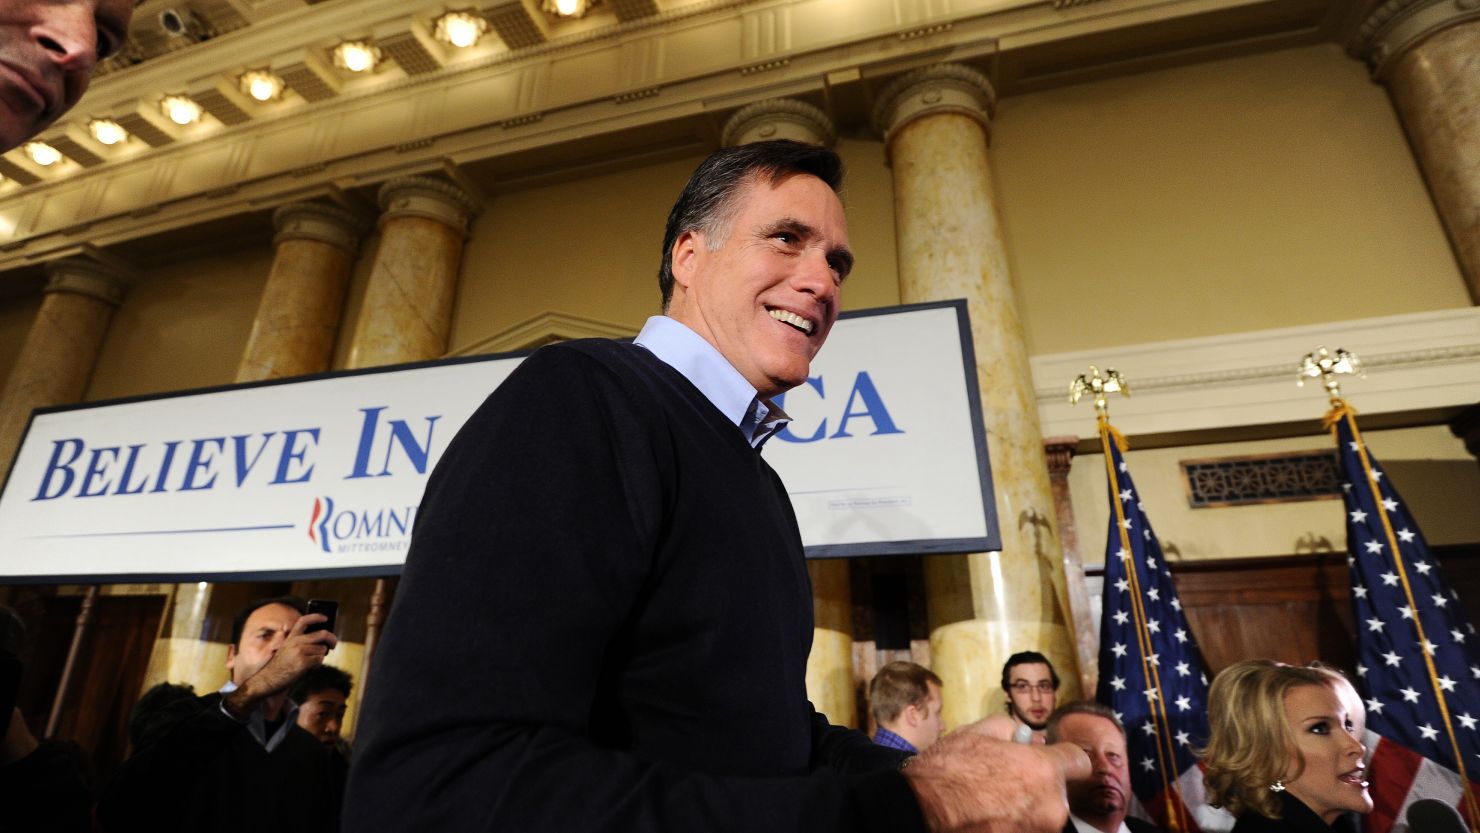 Republican presidential hopeful Mitt Romney greets supporters during a campaign rally Tuesday in Des Moines, Iowa.